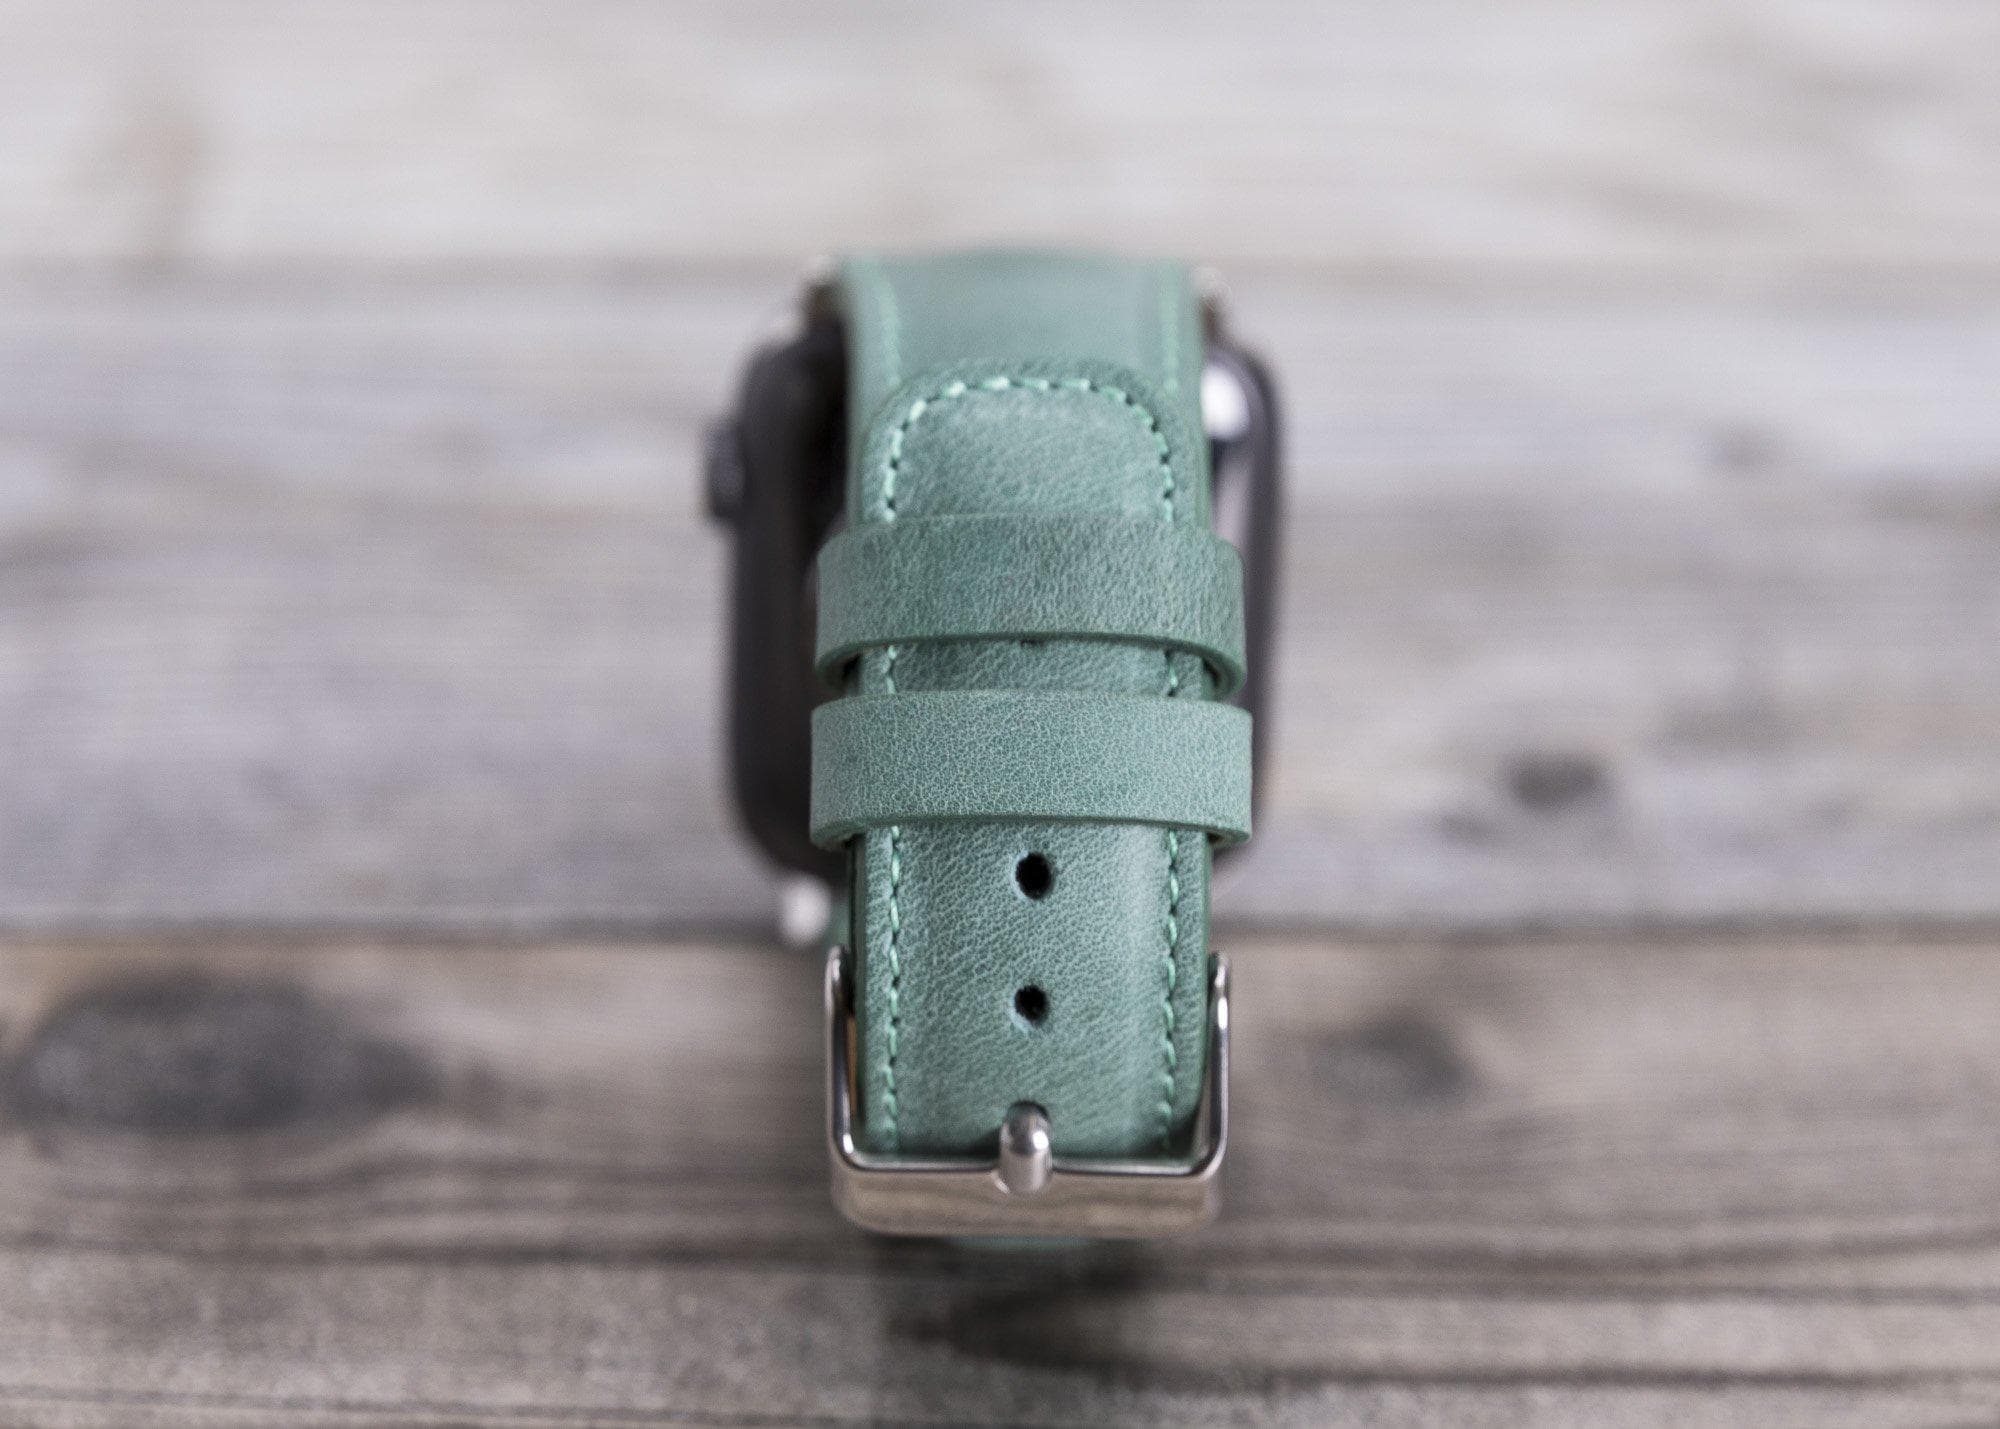 B2B - Leather Apple Watch Bands - Classic Style